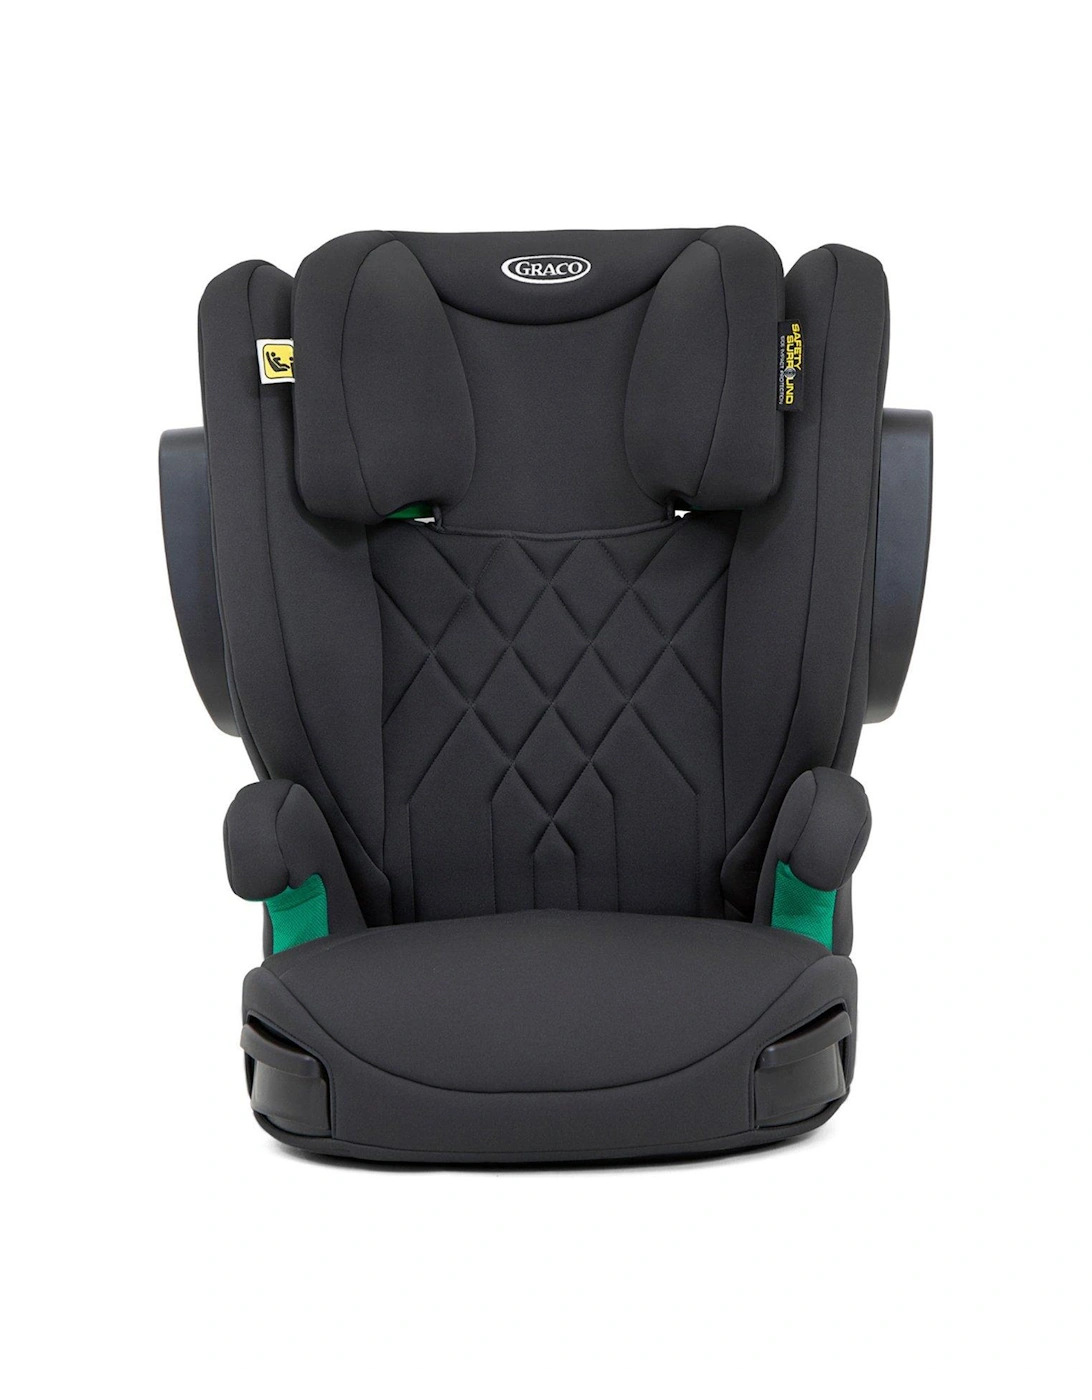 EverSure i-Size High Back Booster Car Seat - Iron, 2 of 1